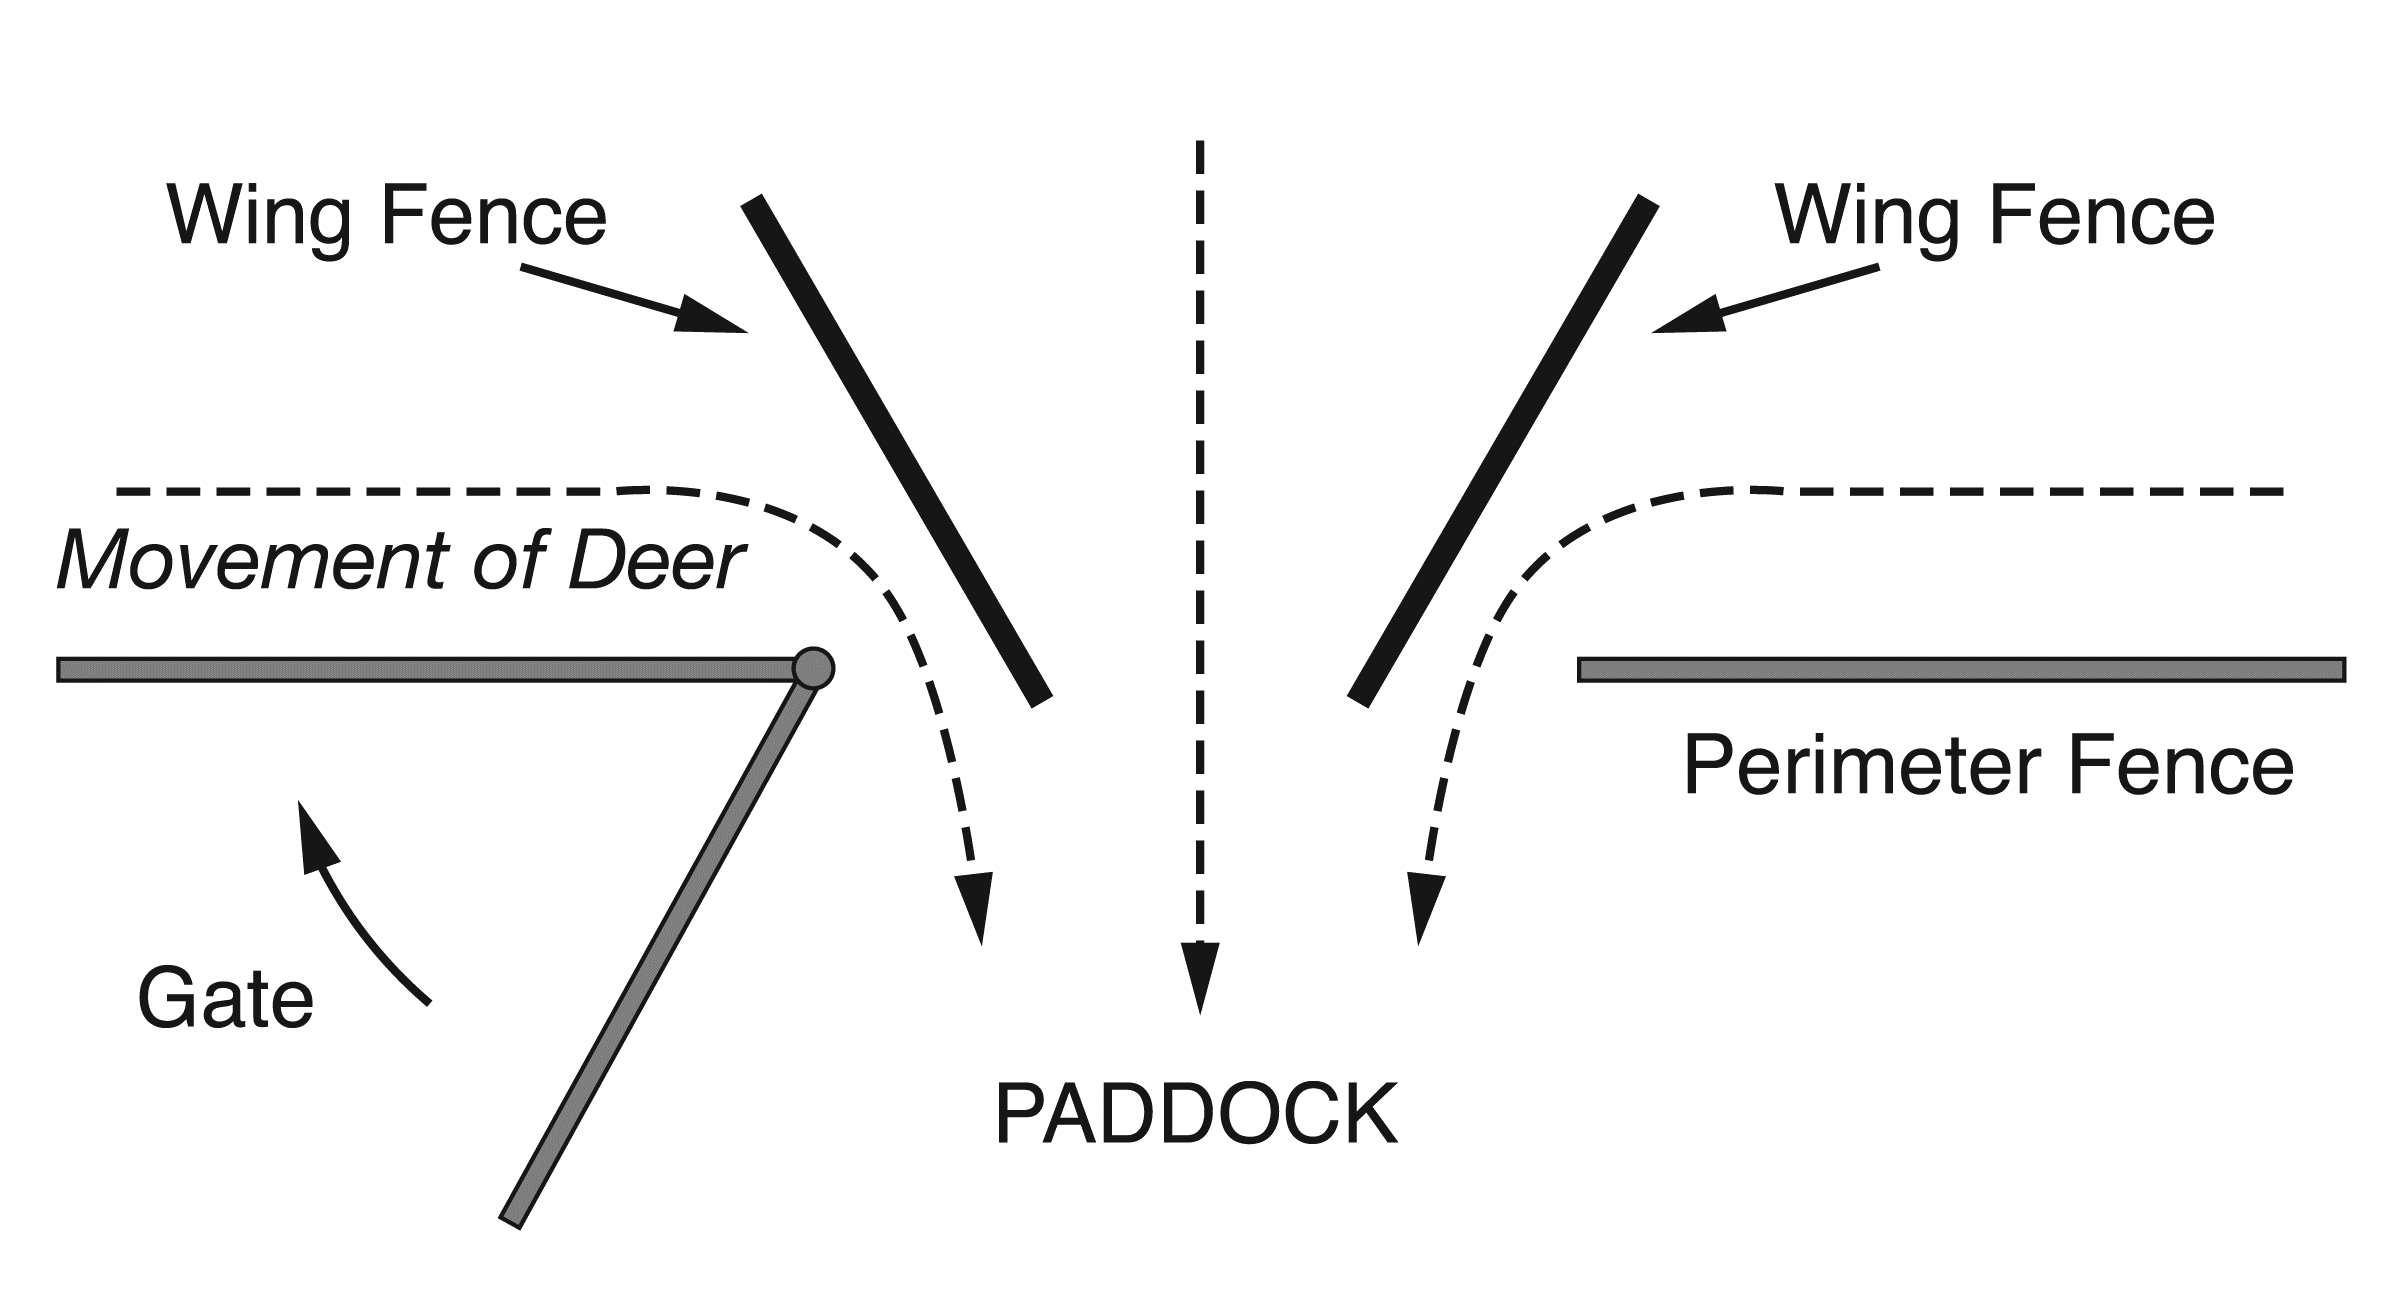 A drawing showing an opening between two wing fences at or near the peimeter fence.